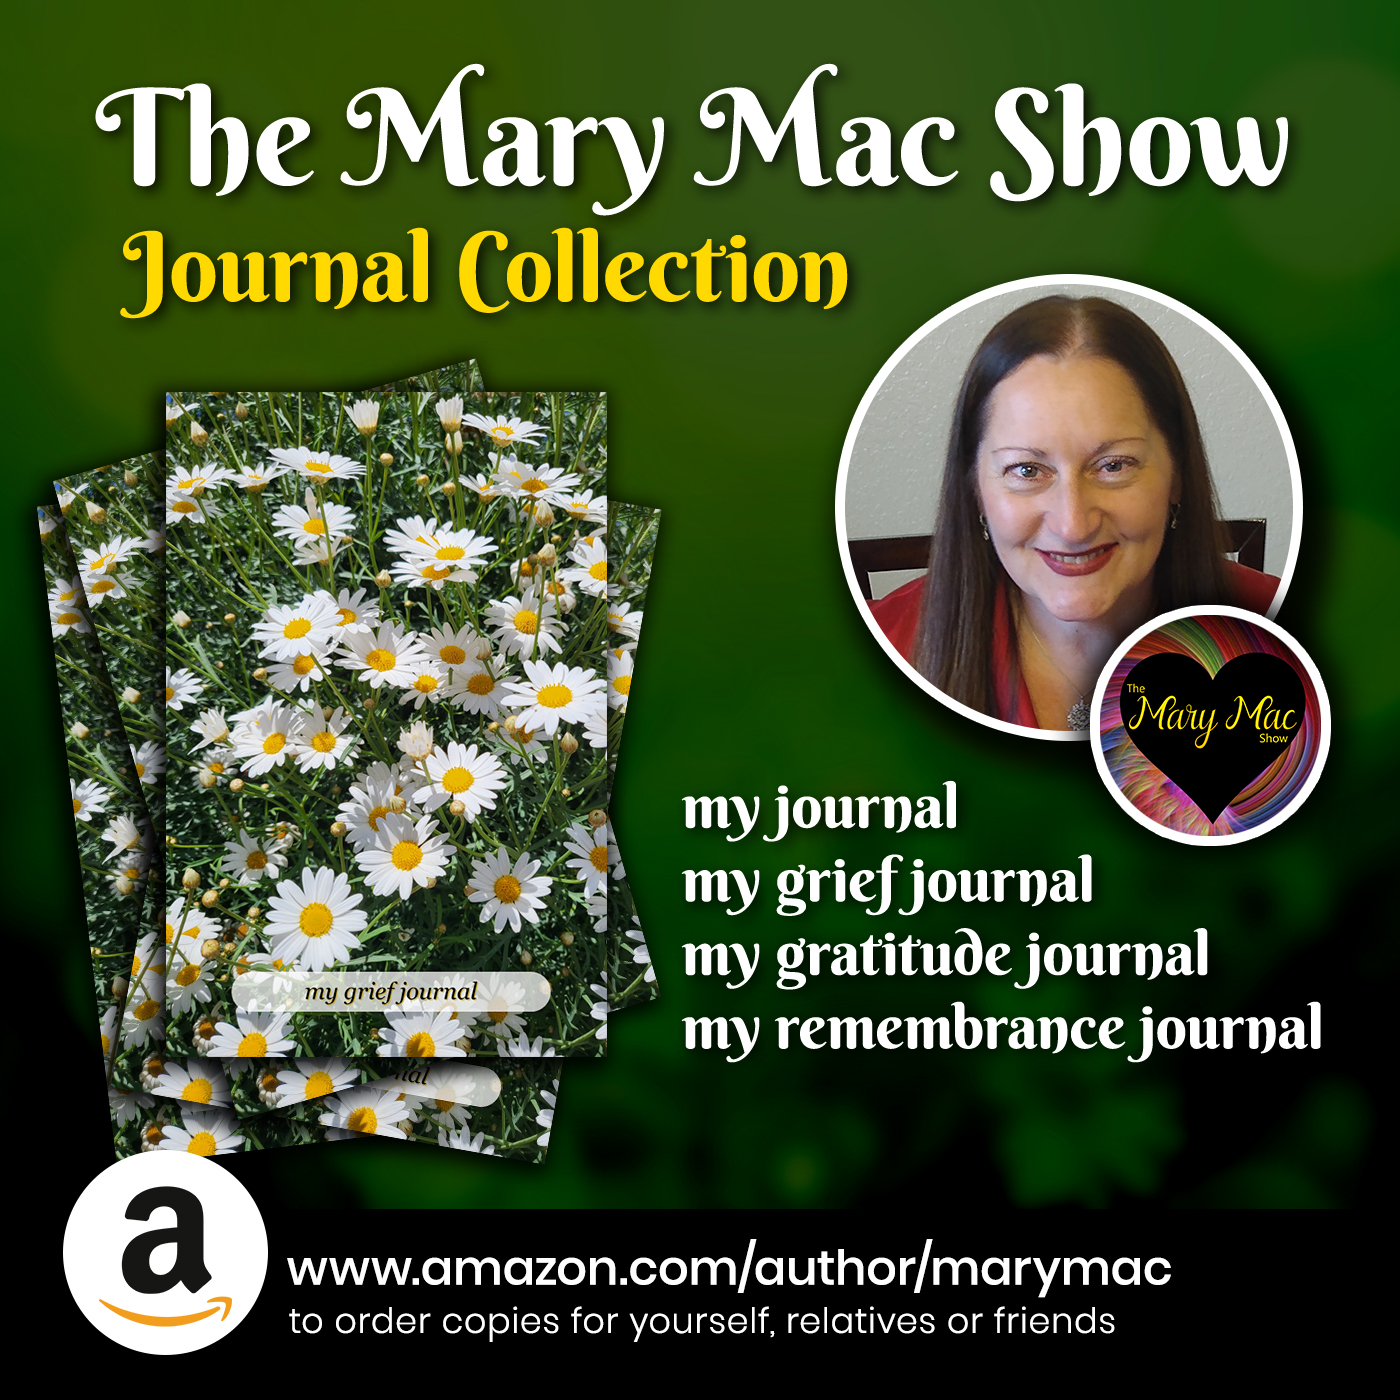 Introducing The Mary Mac Show Journal Collection